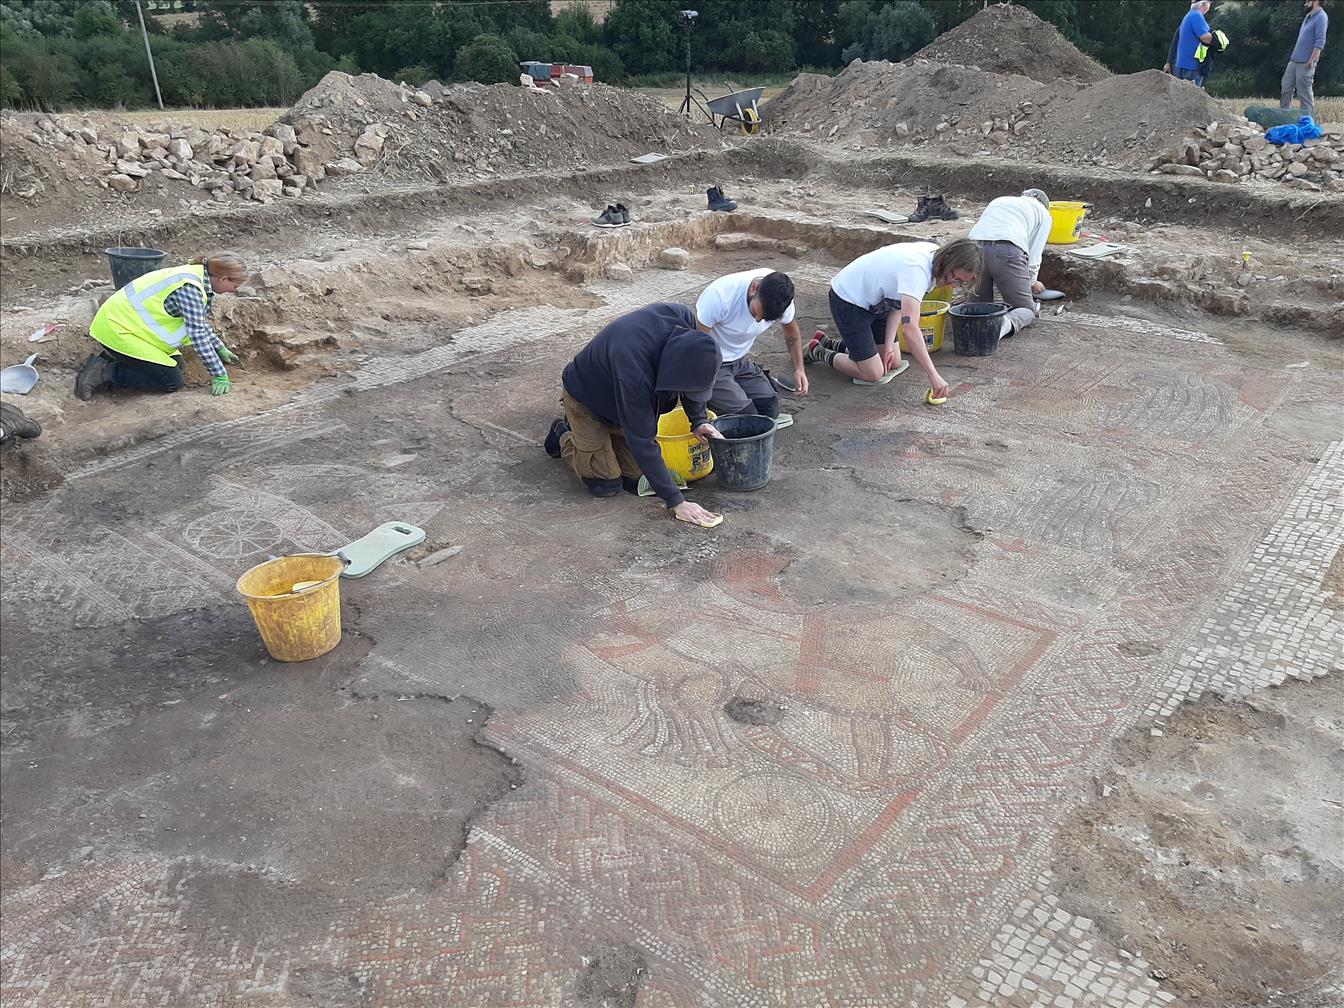 Rutland Roman Villa: How We Found One Of The Most Significant Mosaics Discovered In The UK